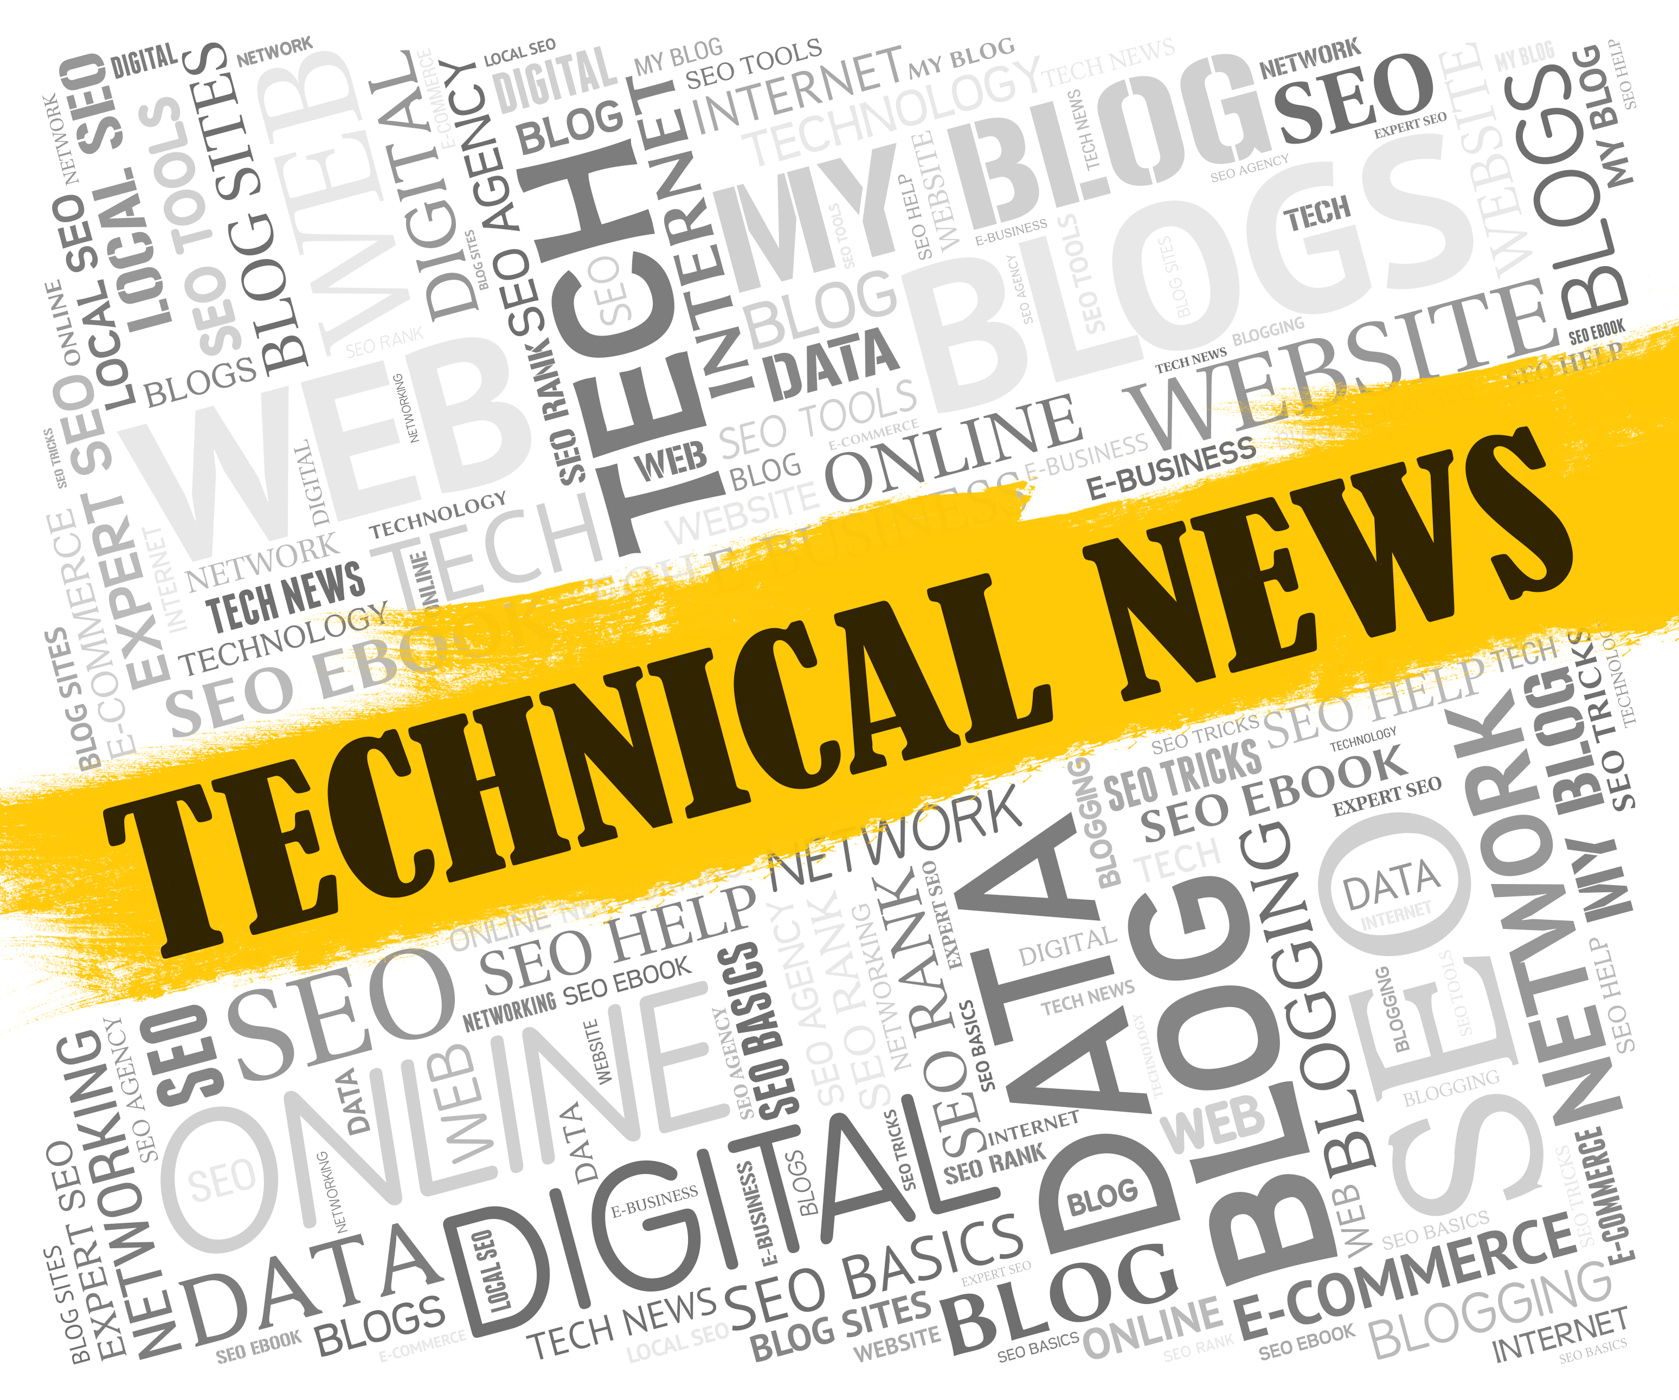 Technical news indicates hi-tech specialist and science photo